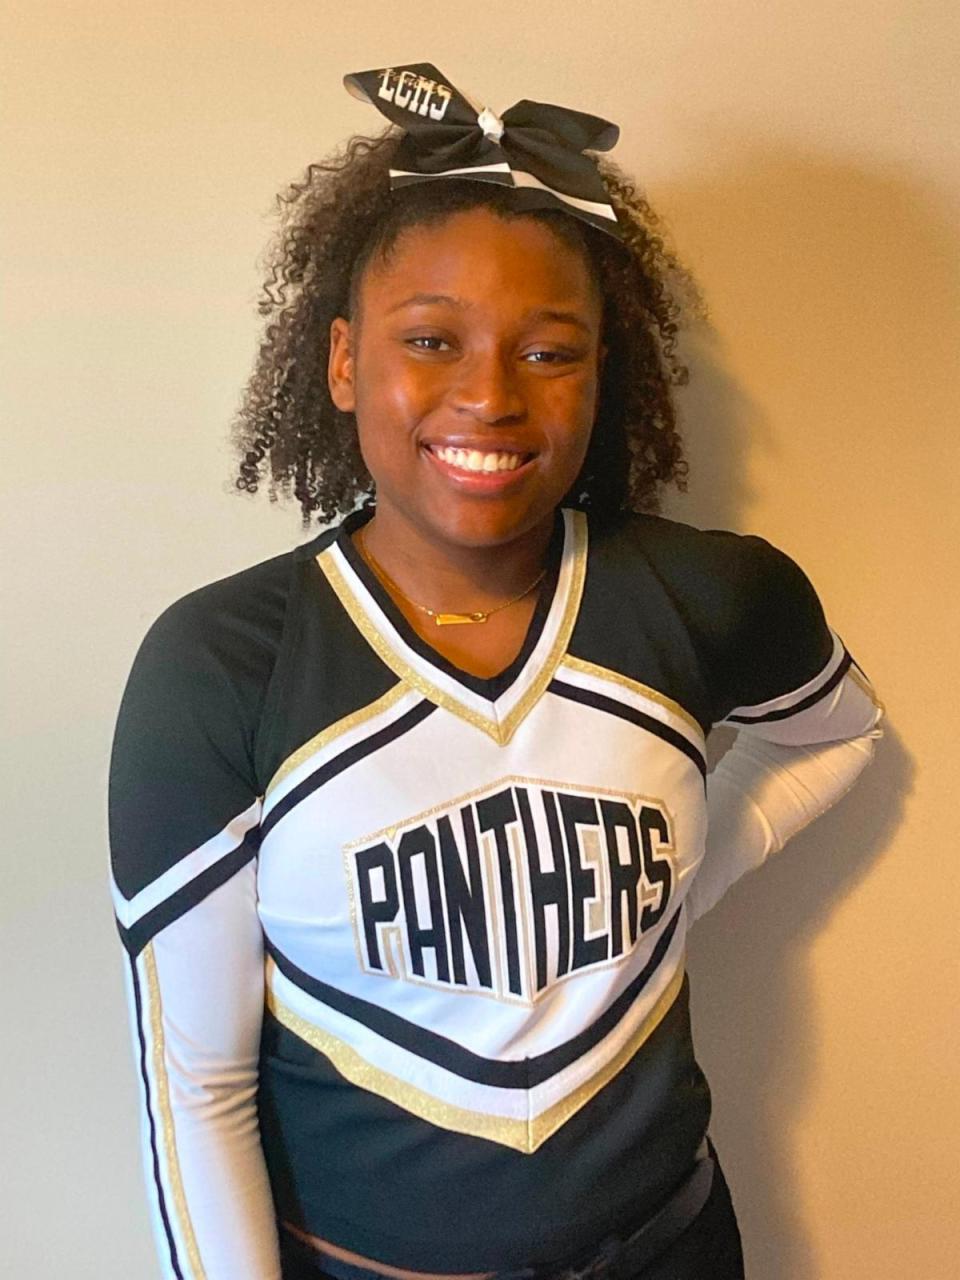 PHOTO: Madison Crowell, a high school senior, has been active in multiple extracurricular activities and was varsity cheerleader at Liberty County High School in Hinesville, Georgia. (Courtesy of Madison Crowell)